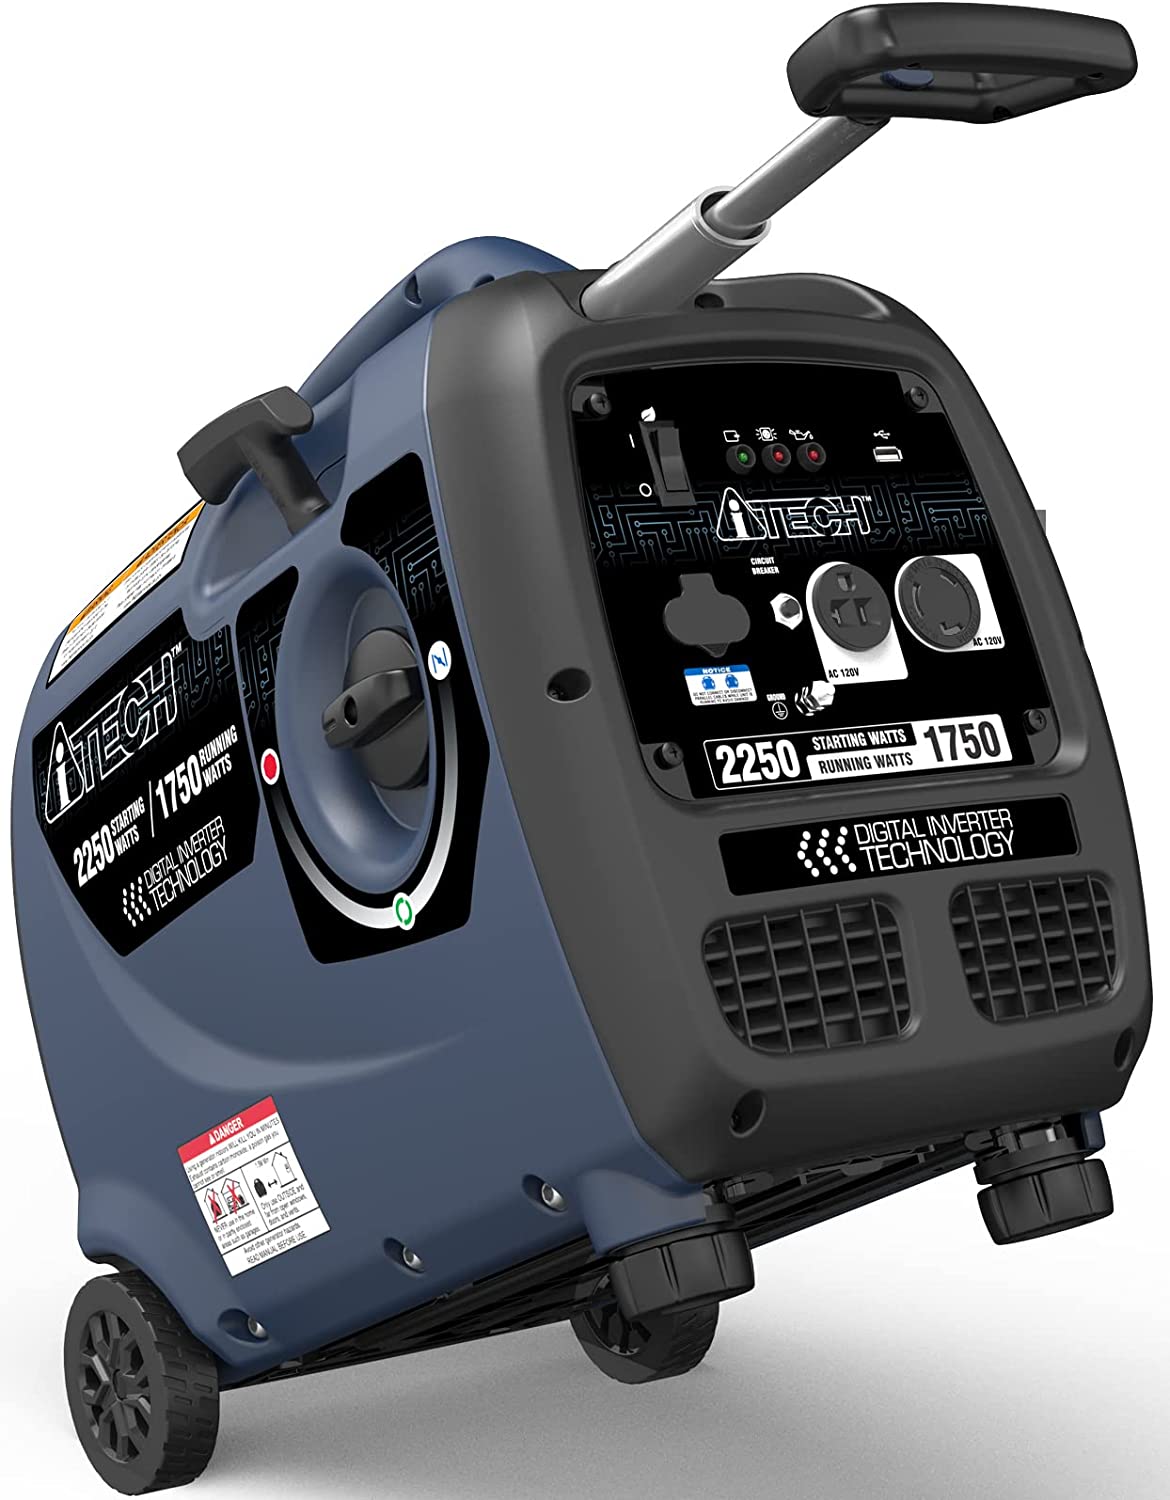 A ITECH AT20 122501 Portable Inverter Generator